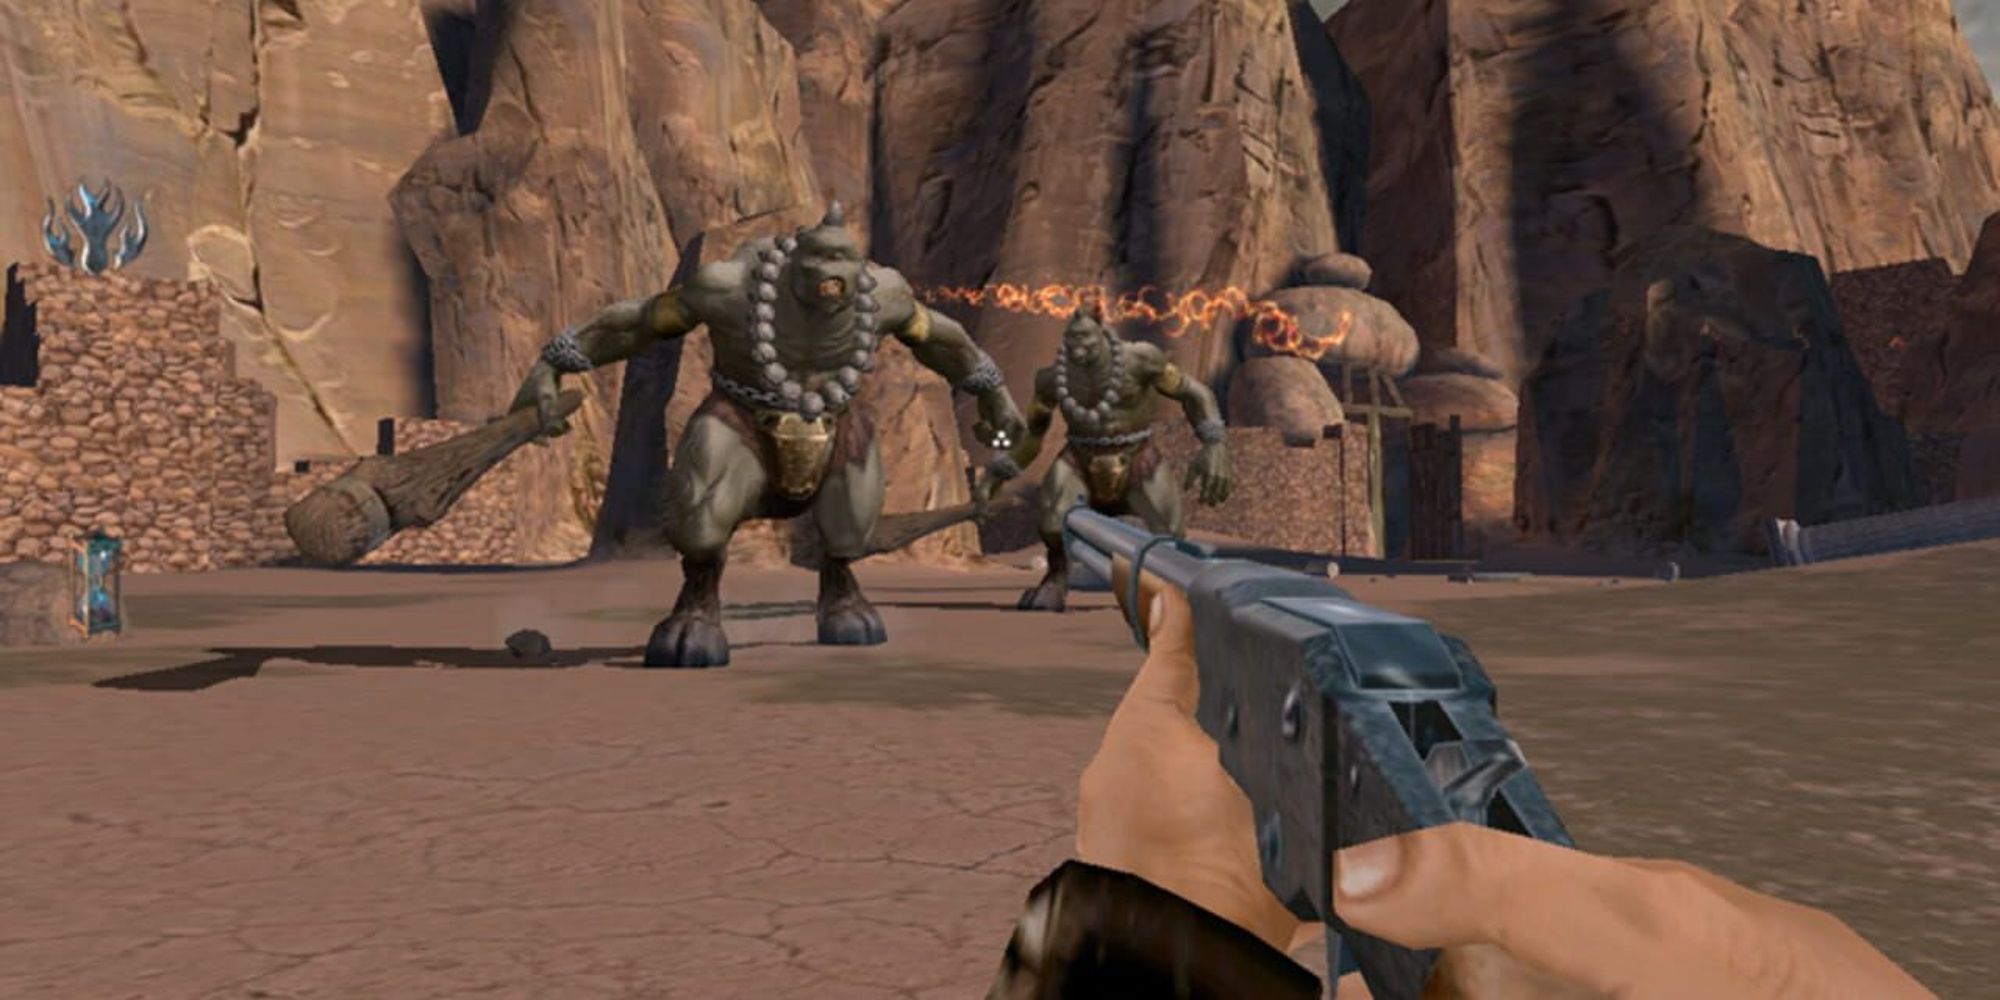 Will fighting off two cyclopses with a rifle in Will Rock (2003)